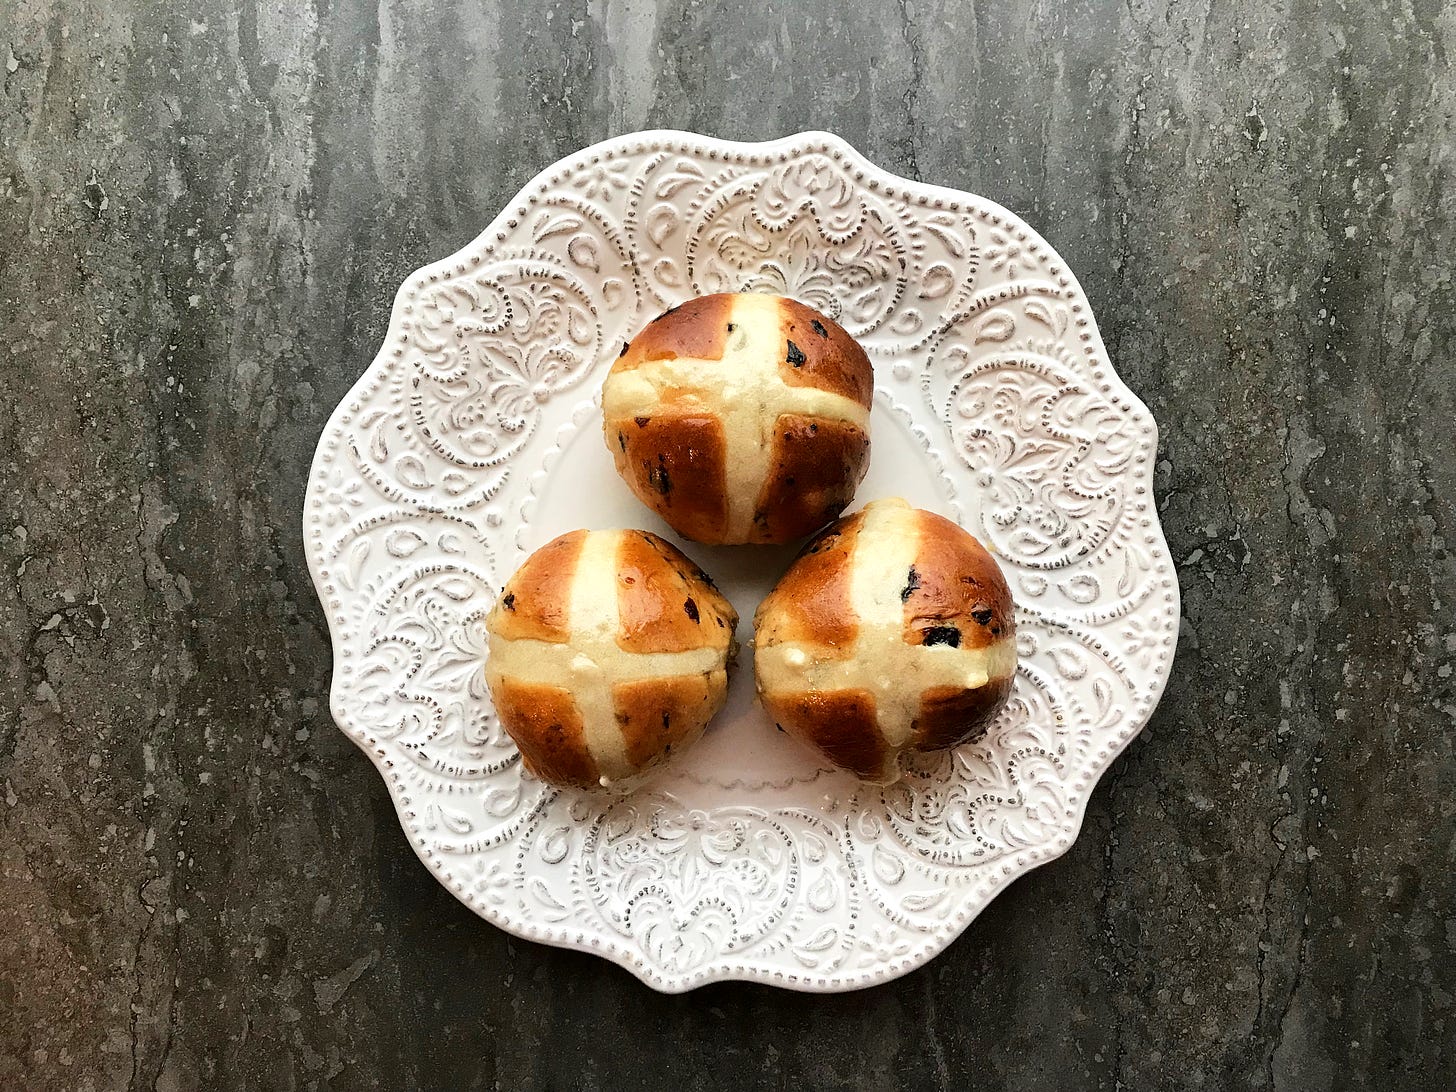 Three baked hot cross buns on an embossed white plate. The buns are a gorgeous umber, speckled with fruit. The paste cross is ivory-coloured in contrast.